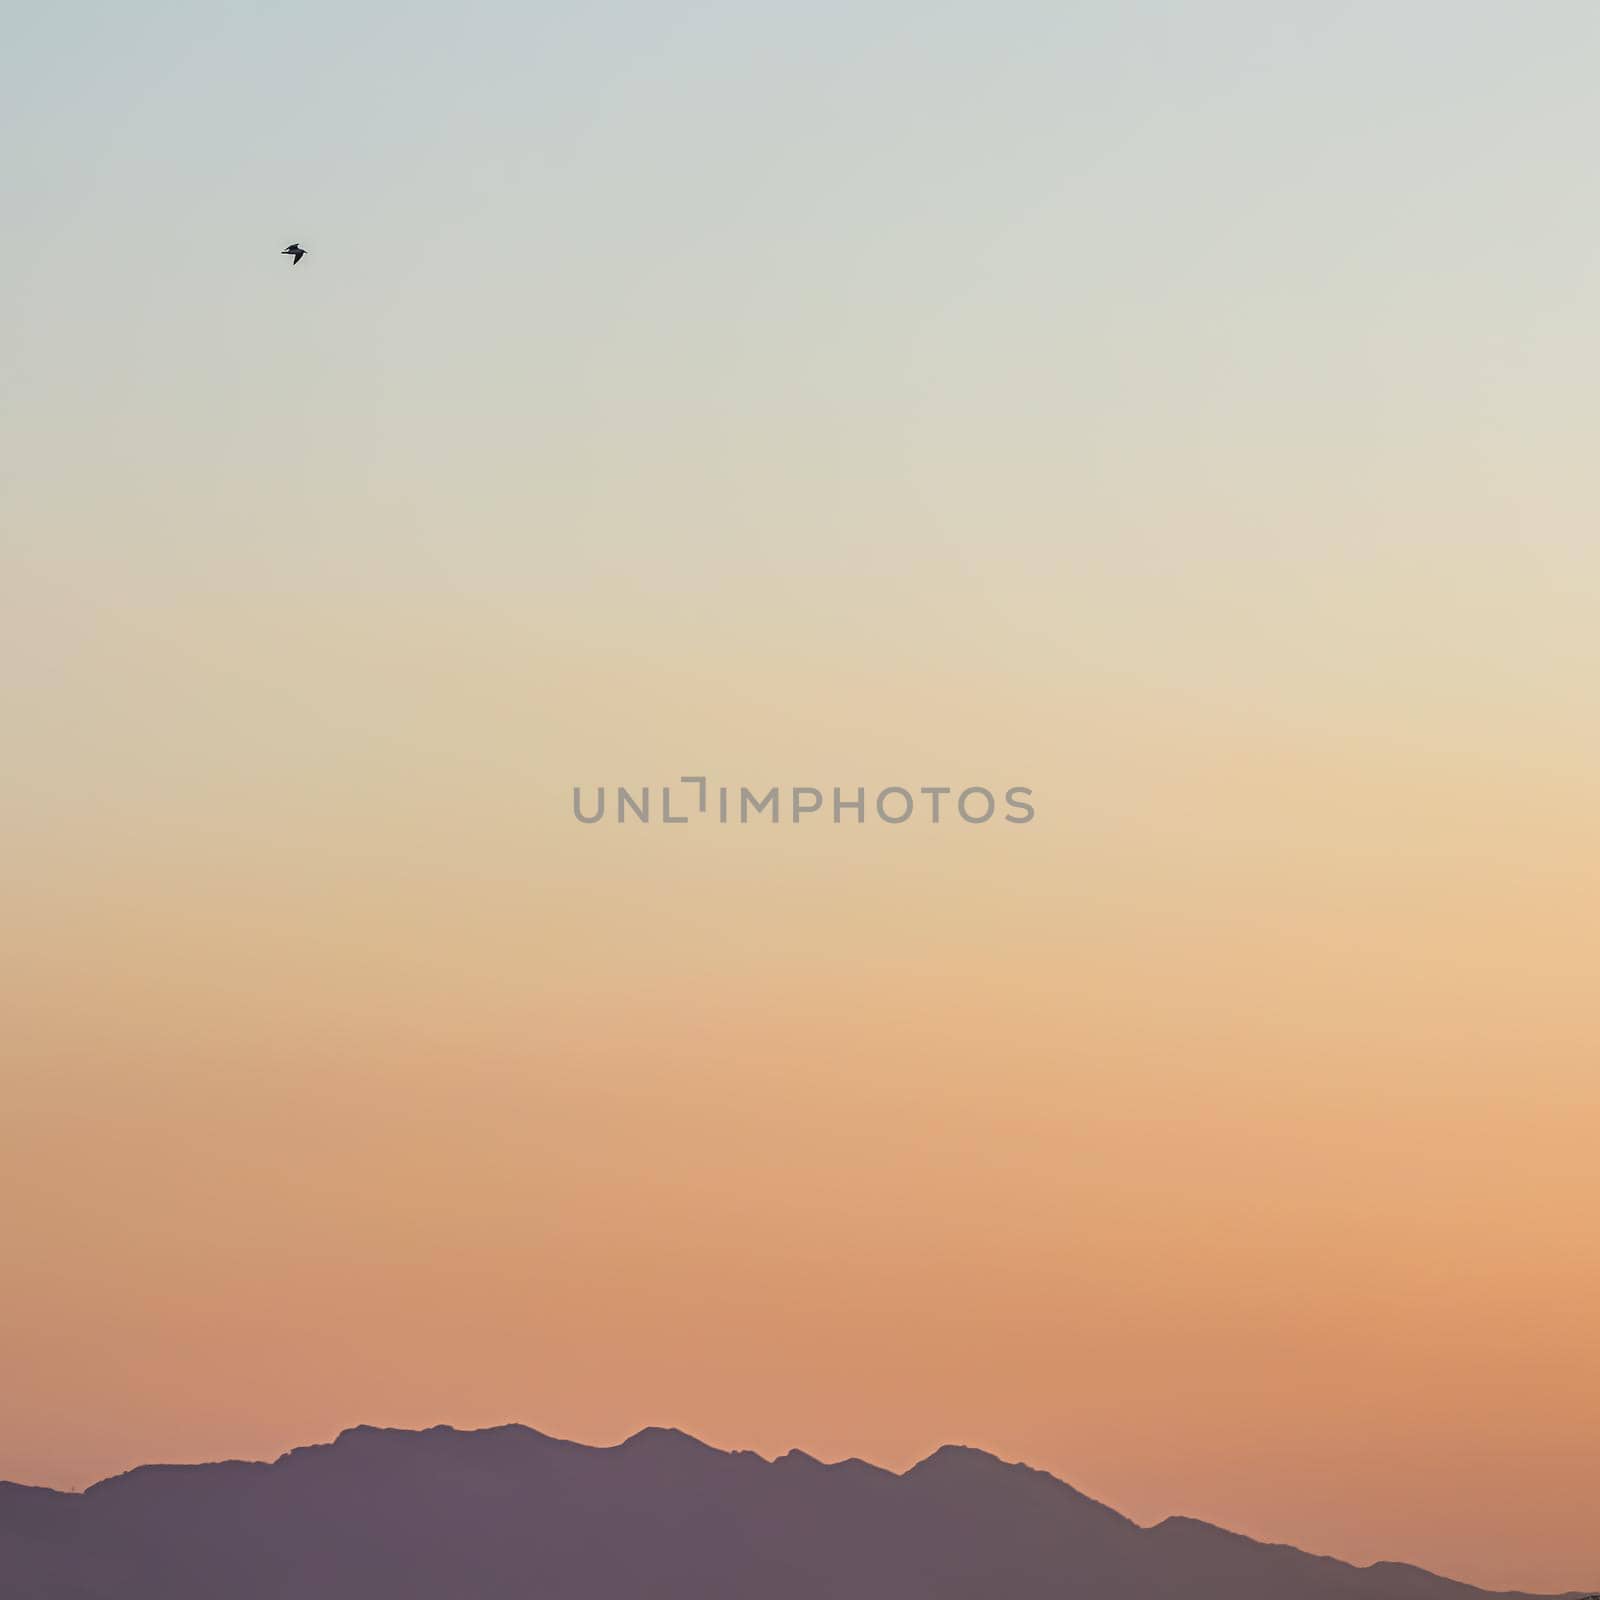 Background from a beautiful colorful sunset with the silhouette of the mountains and a flying bird. High quality photo